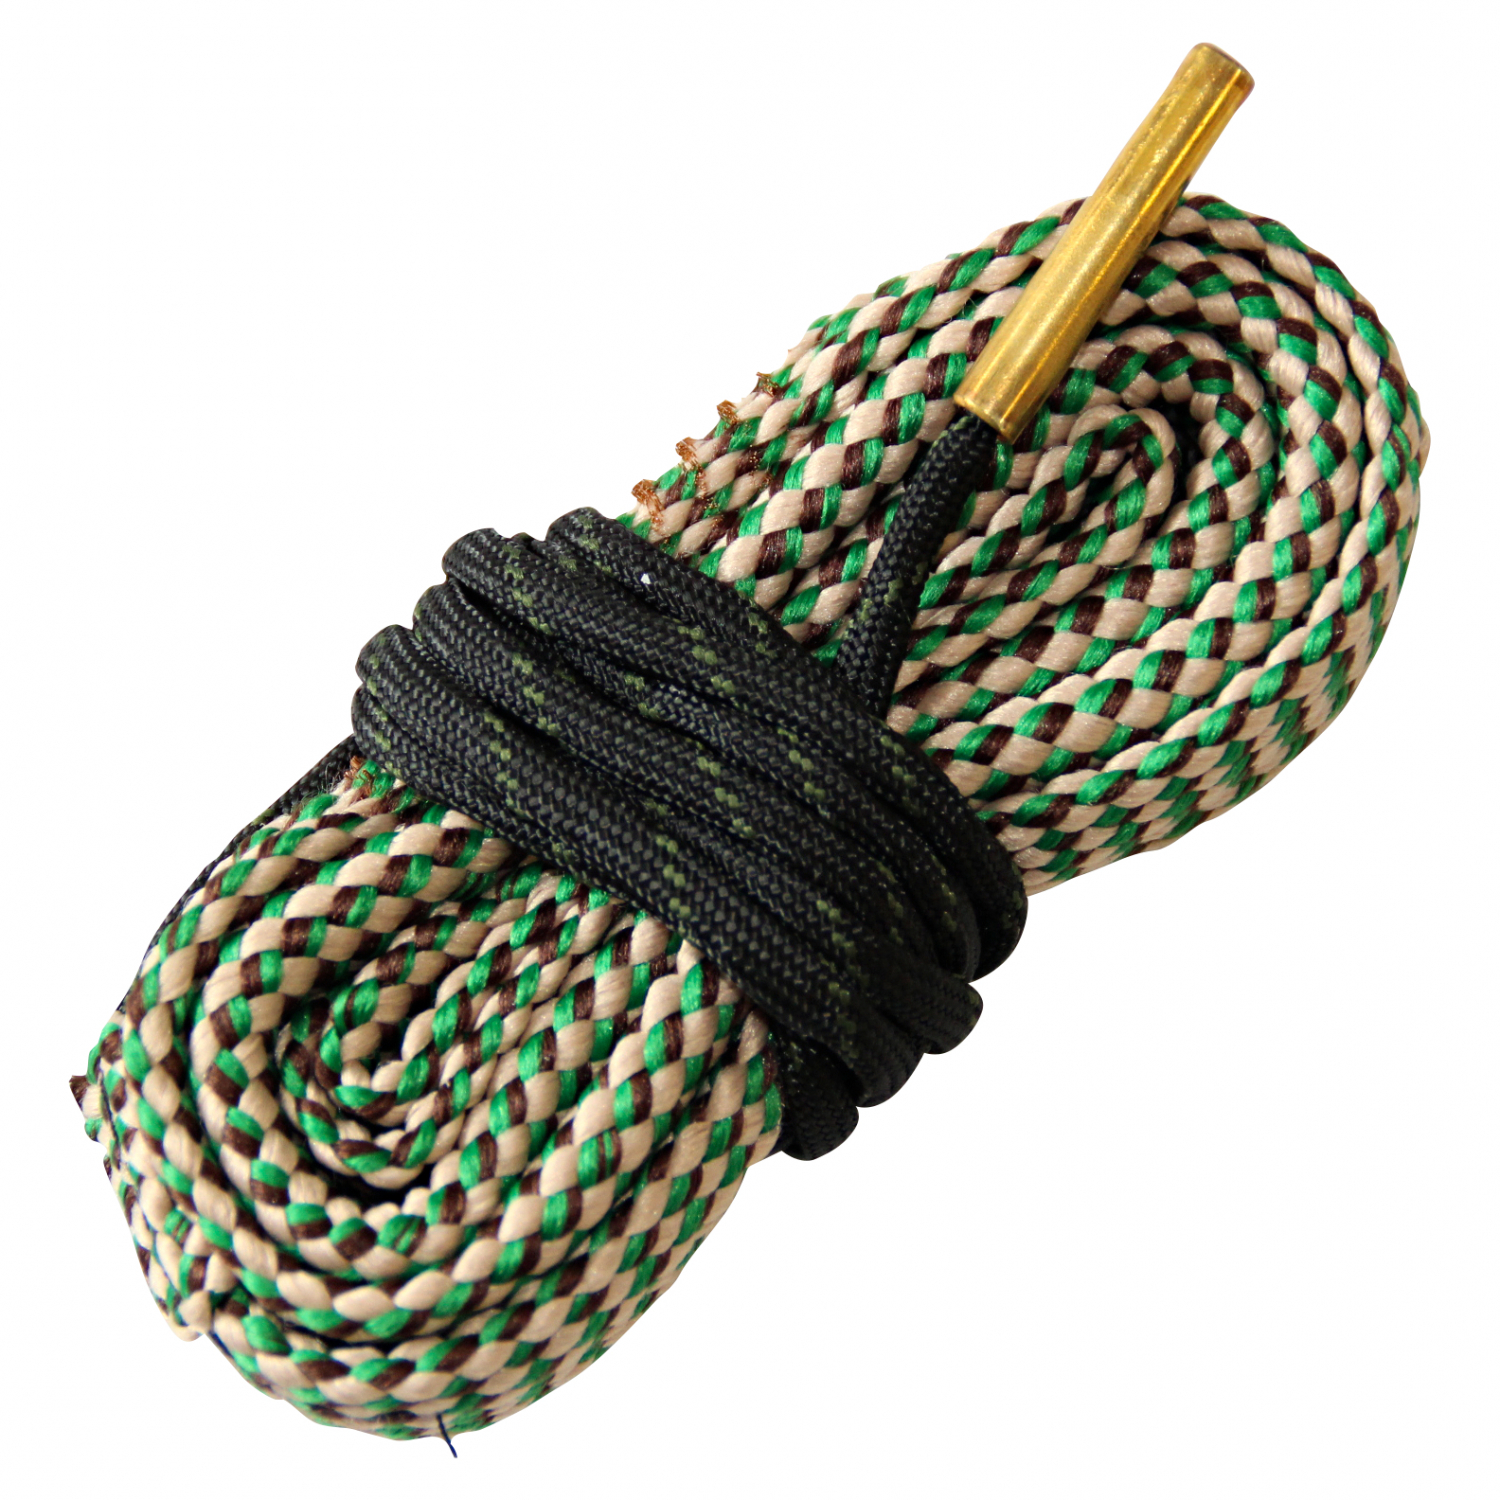 Ligne Verney-Carron Gun Cleaning Rope Rifle (cal. 8 mm) 